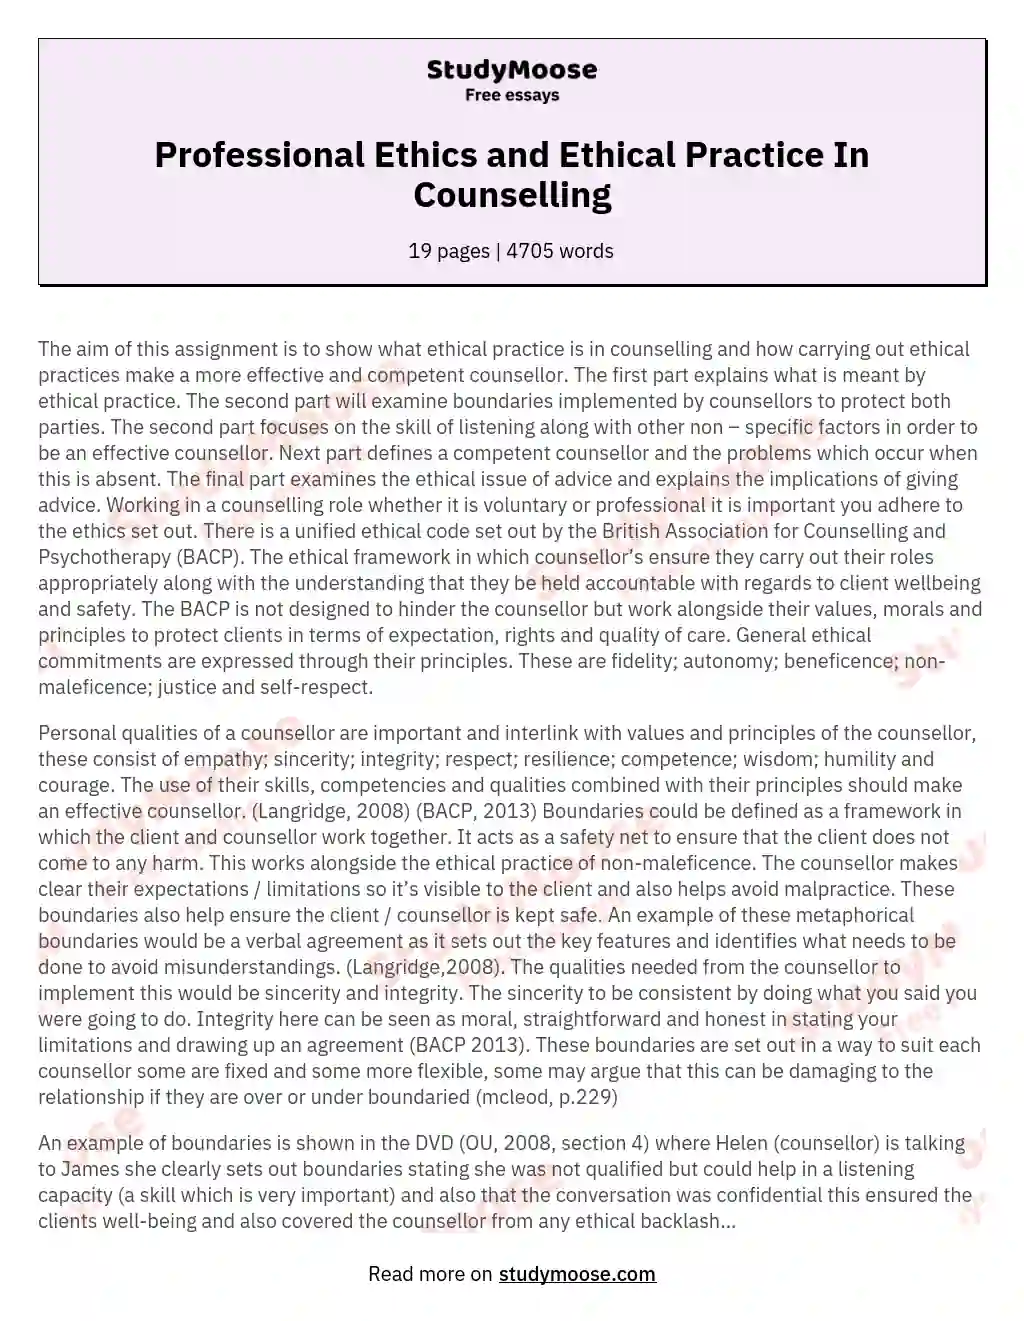 Professional Ethics and Ethical Practice In Counselling